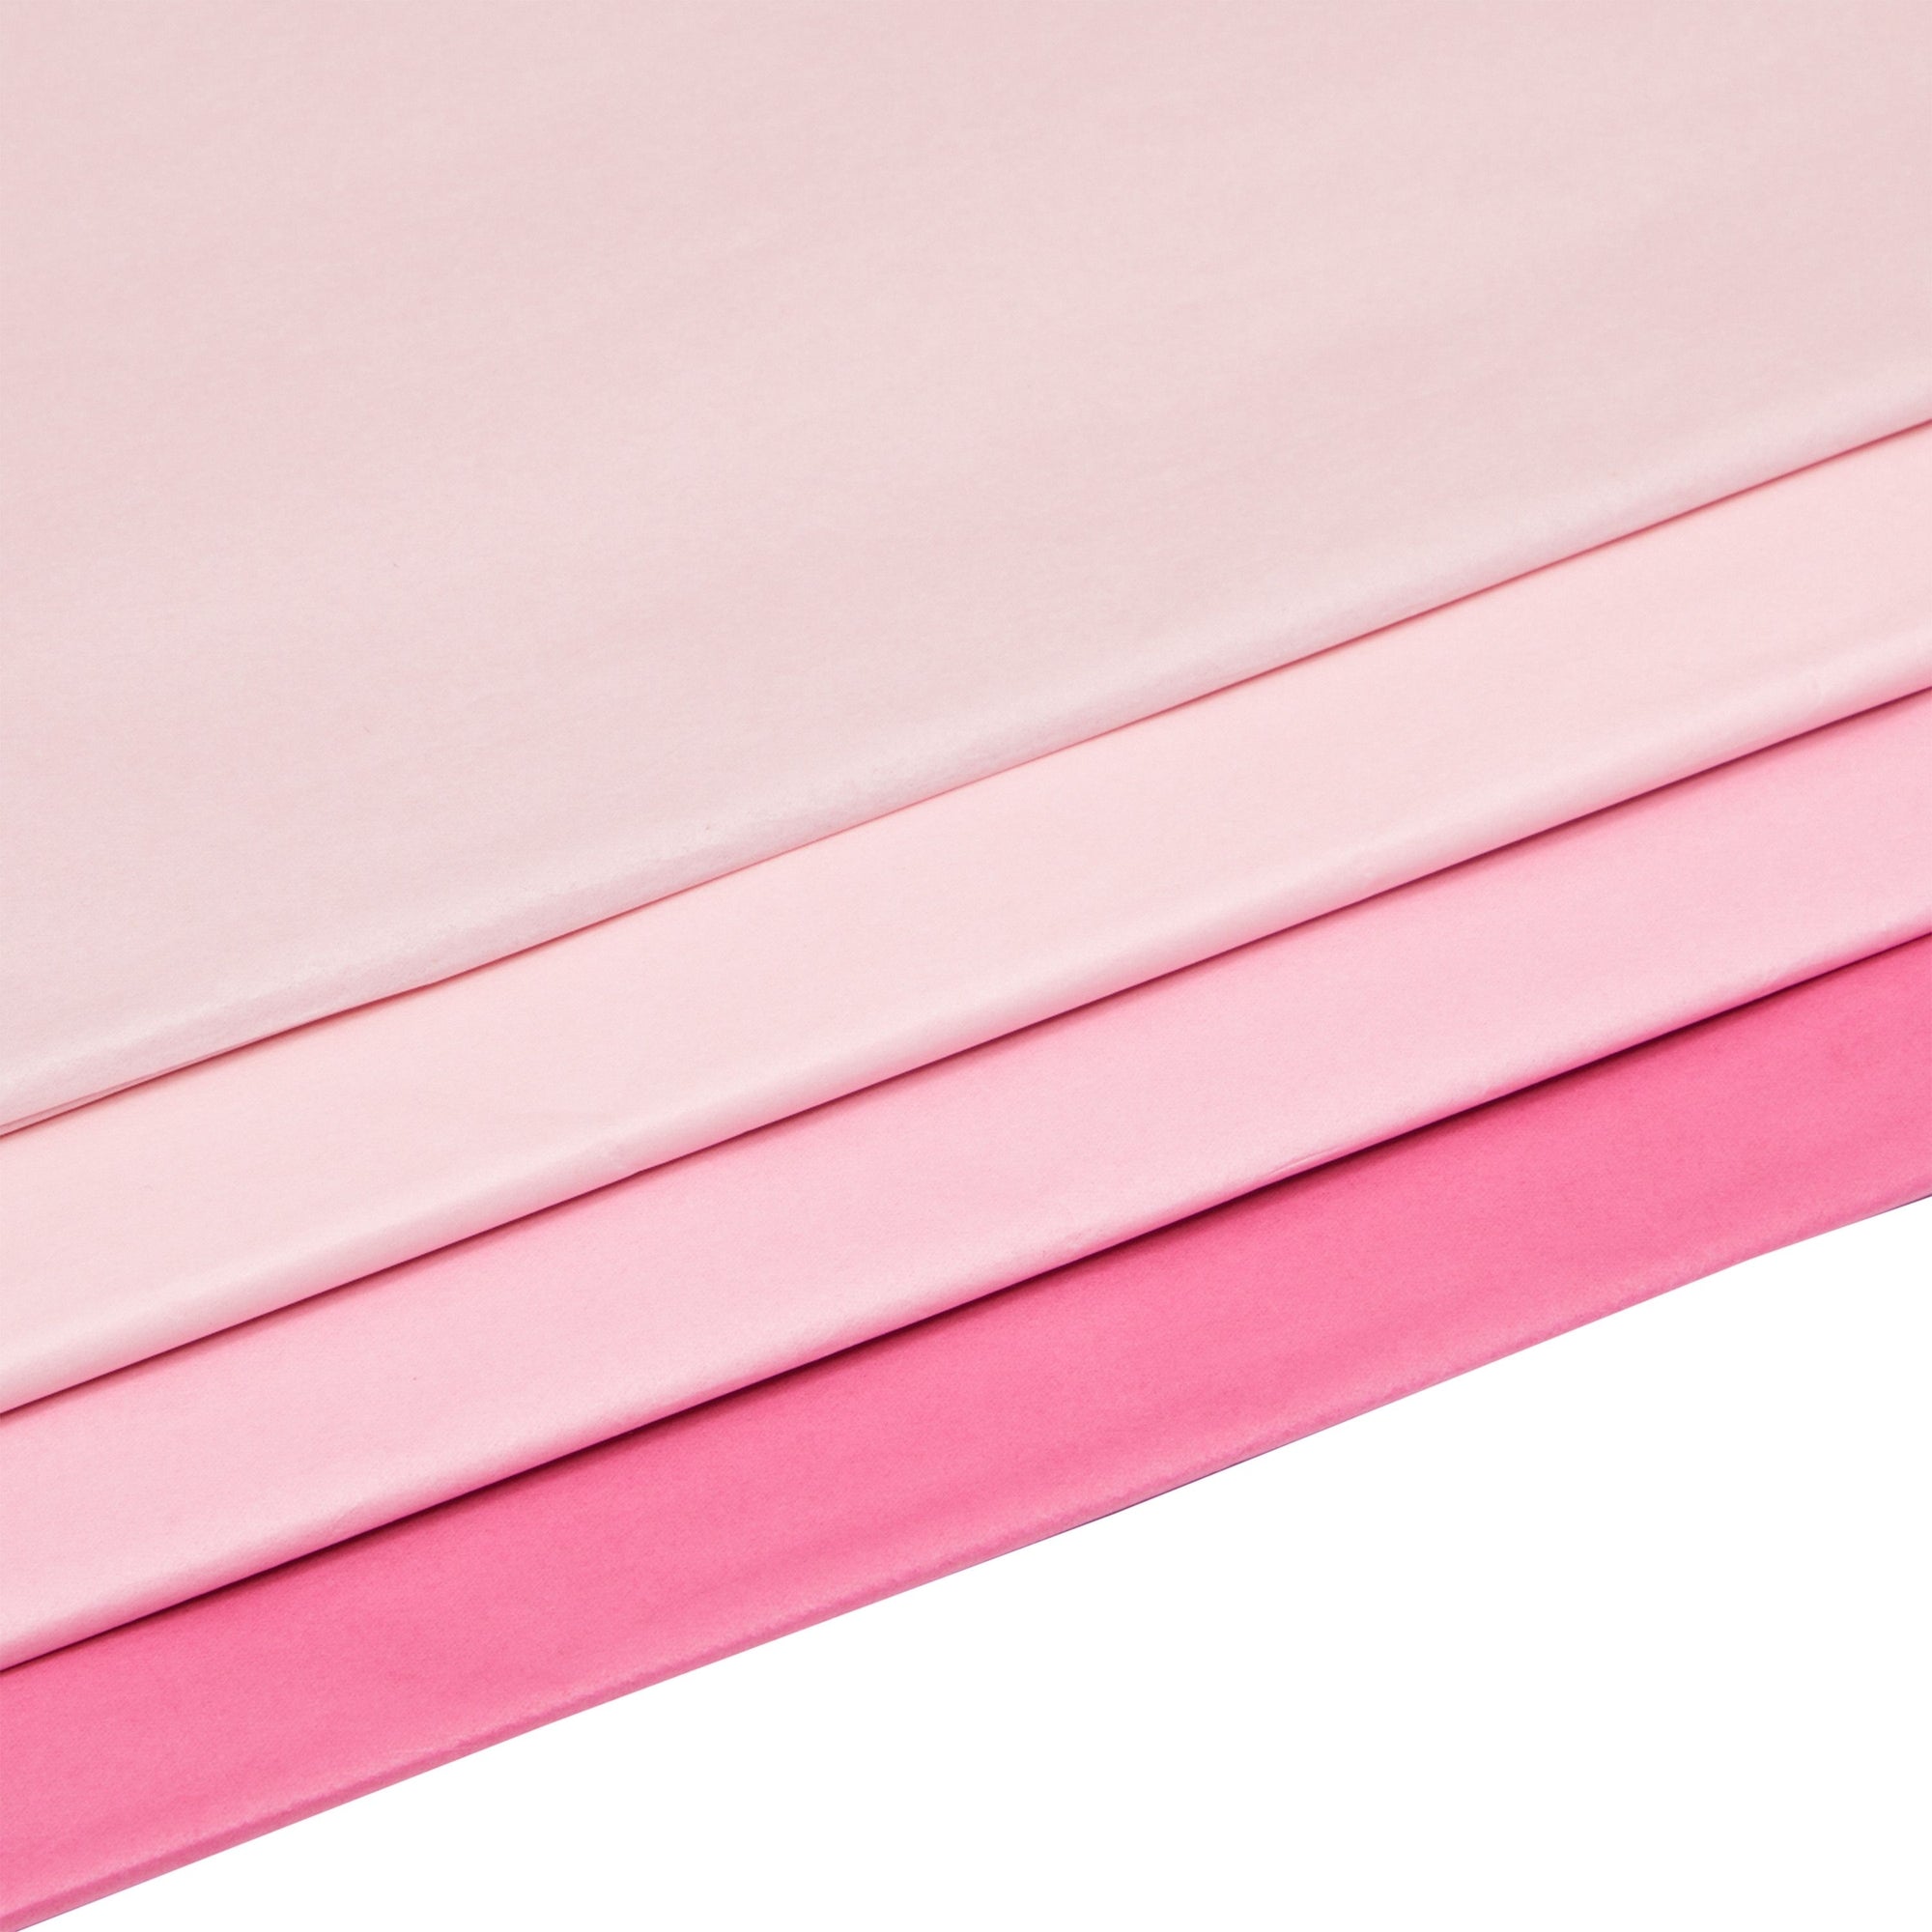 160 Sheets Bulk Tissue Paper for Gift Wrapping Bags, Valentines DIY Crafts,  4 Pink Colors, 15 x 20 In